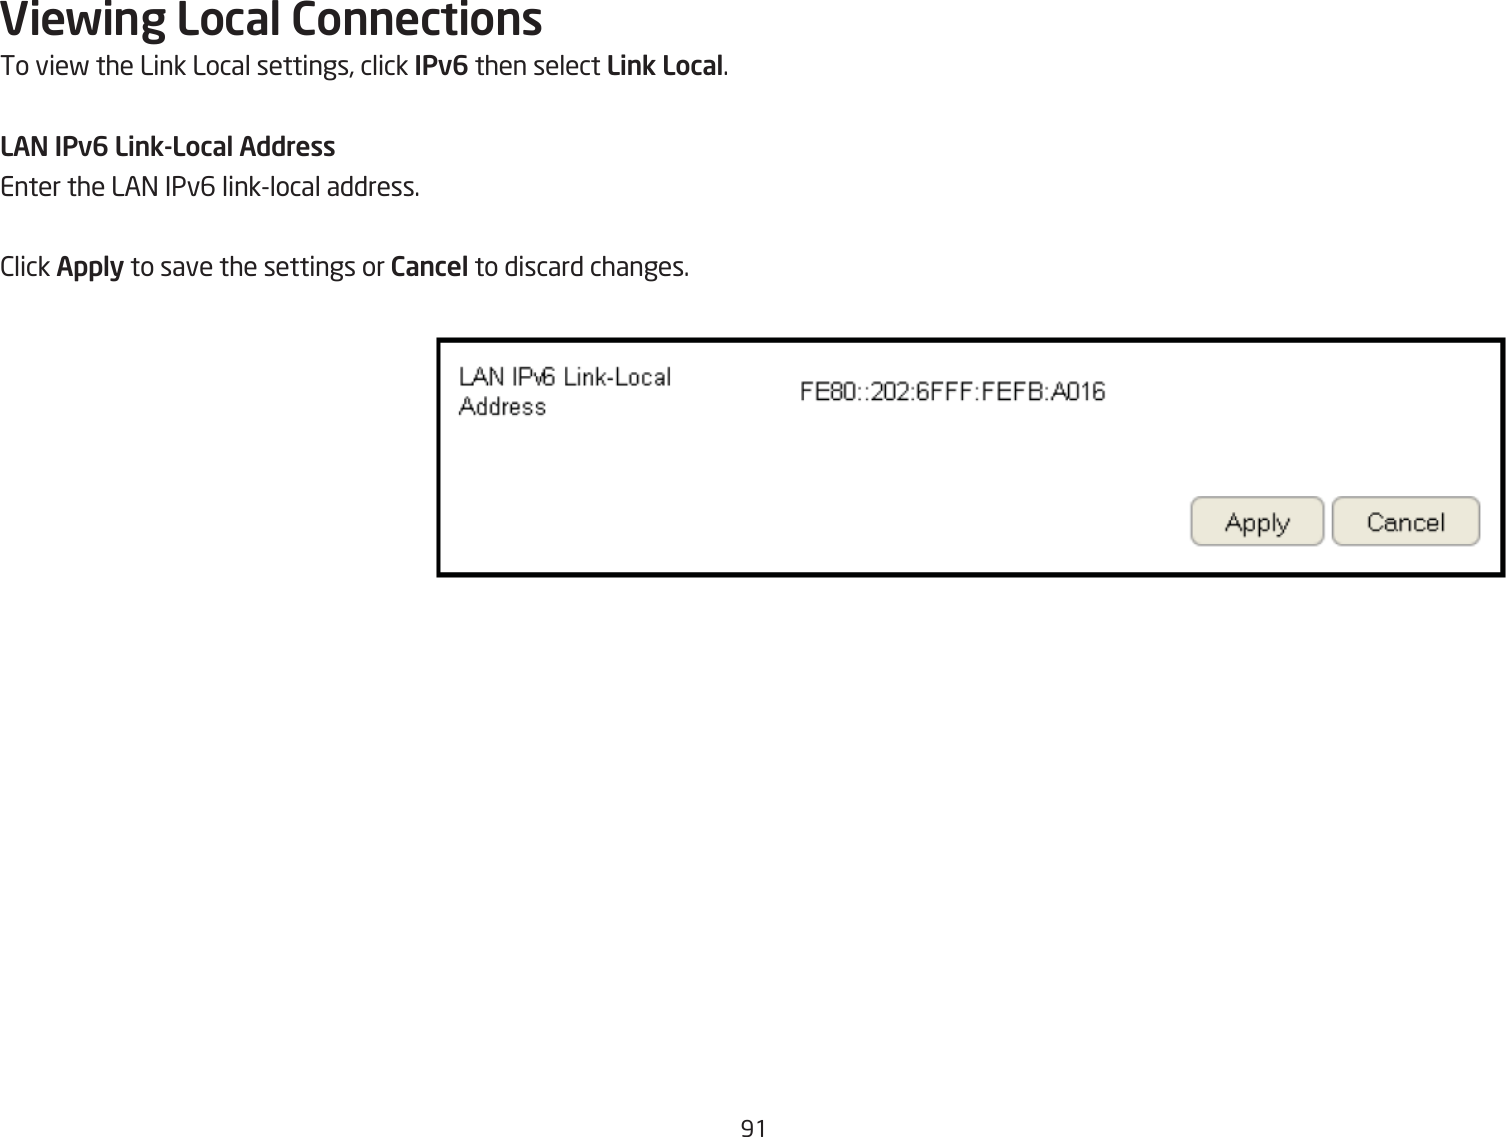 91Viewing Local ConnectionsTo vief the Link Local settings, click IPv6 then select Link Local.LAN IPv6 Link-Local AddressEnter the LA= IPv6 linklocal address.2lick Apply to save the settings or Cancel to discard changes.